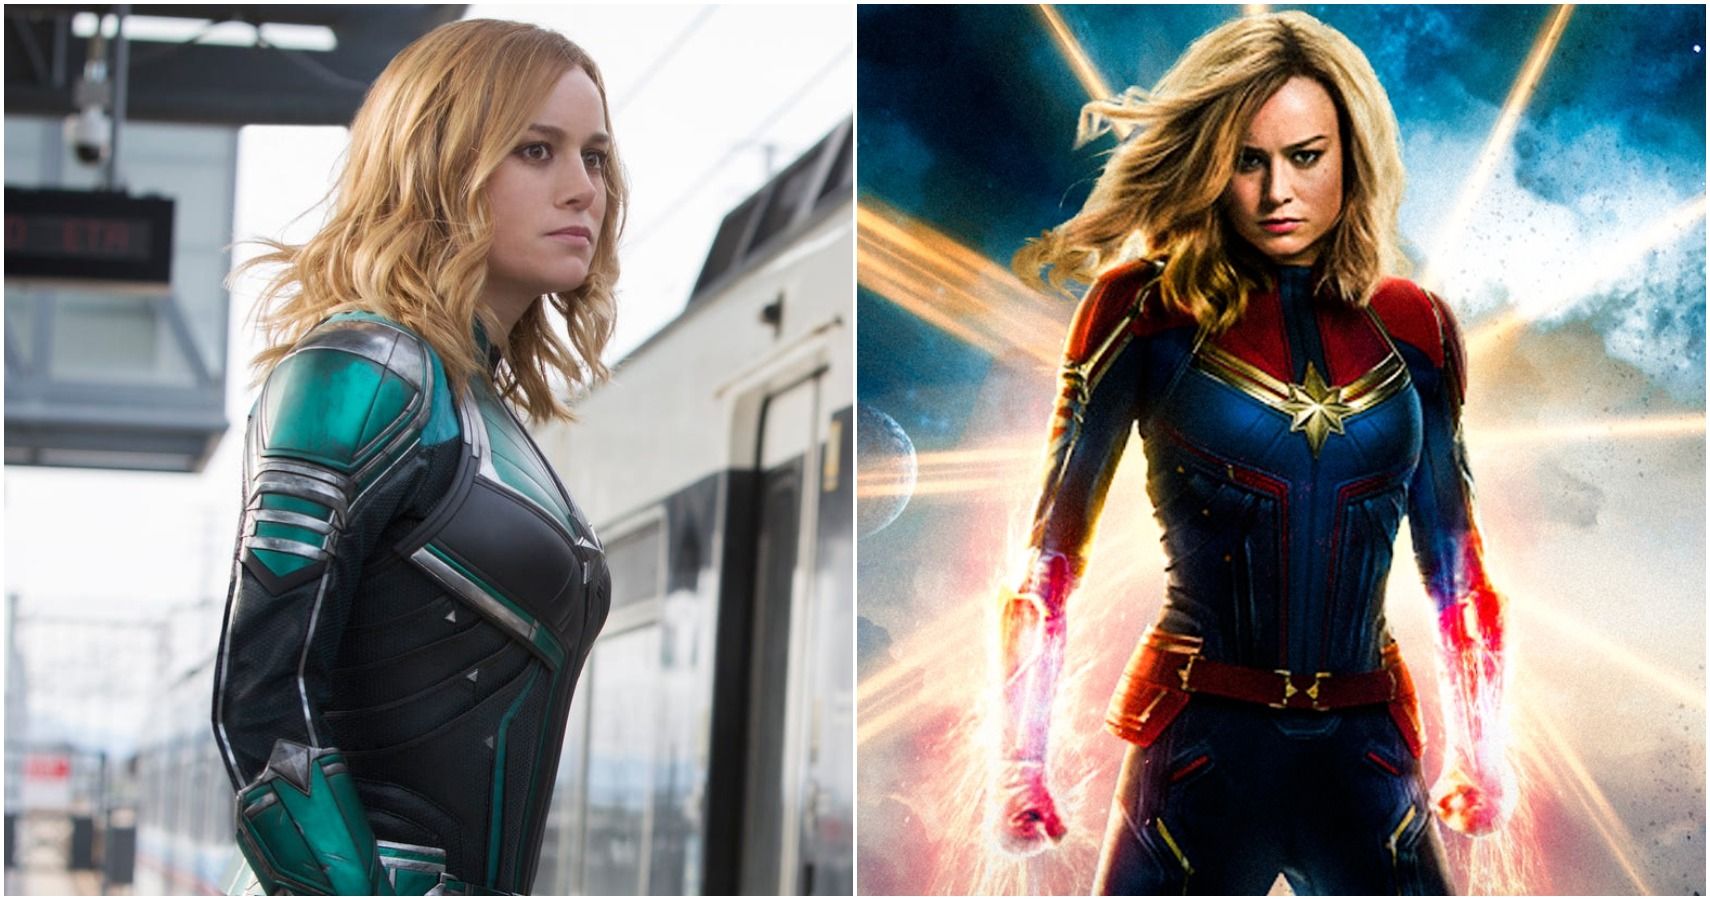 Captain Marvel: 10 Things We Hope To See By The End Of Her MCU Arc